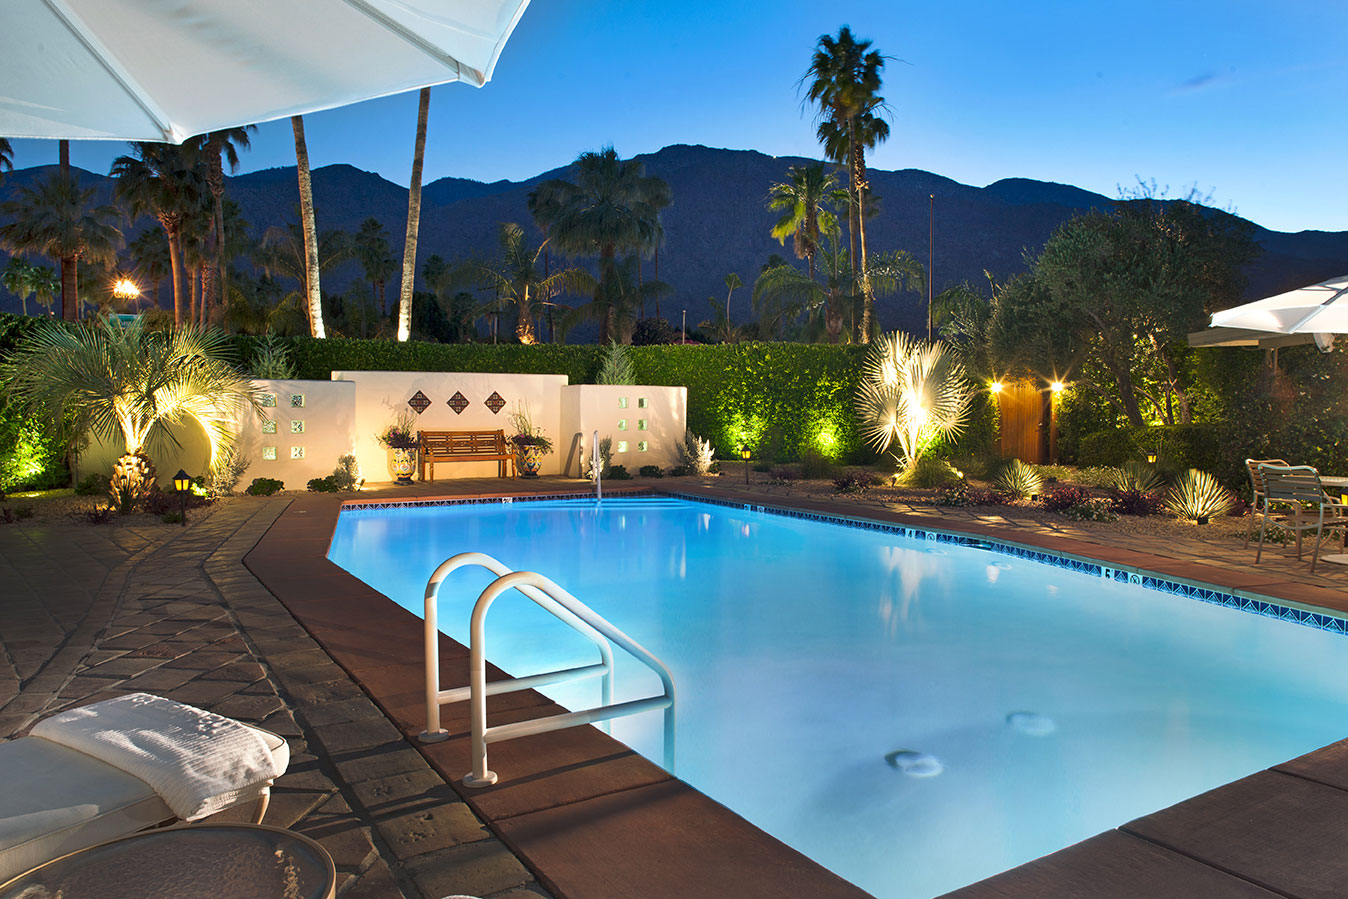 outdoor pool and lounge area for premium gay male clothing optional resort The Hacienda at Warm Sands located in palm springs california